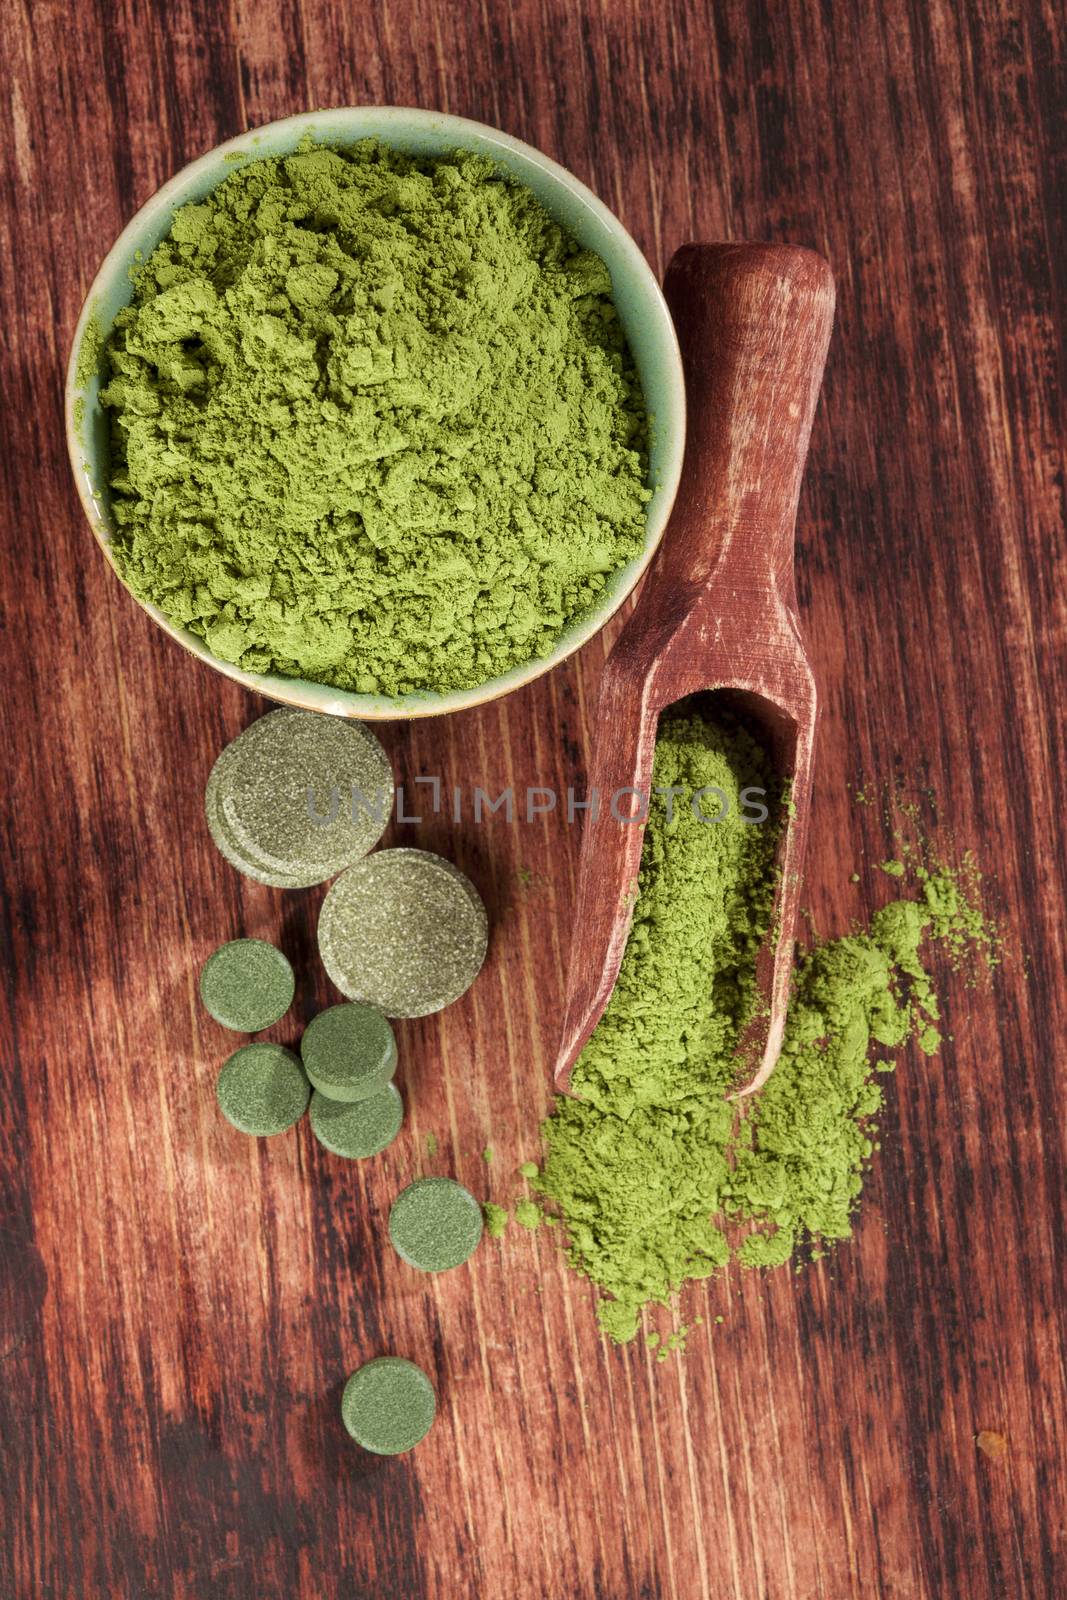 Detox. Chlorella, spirulina and wheatgrass ground and pills with wooden spoon on brown wooden background, top view. Alternative medicine.